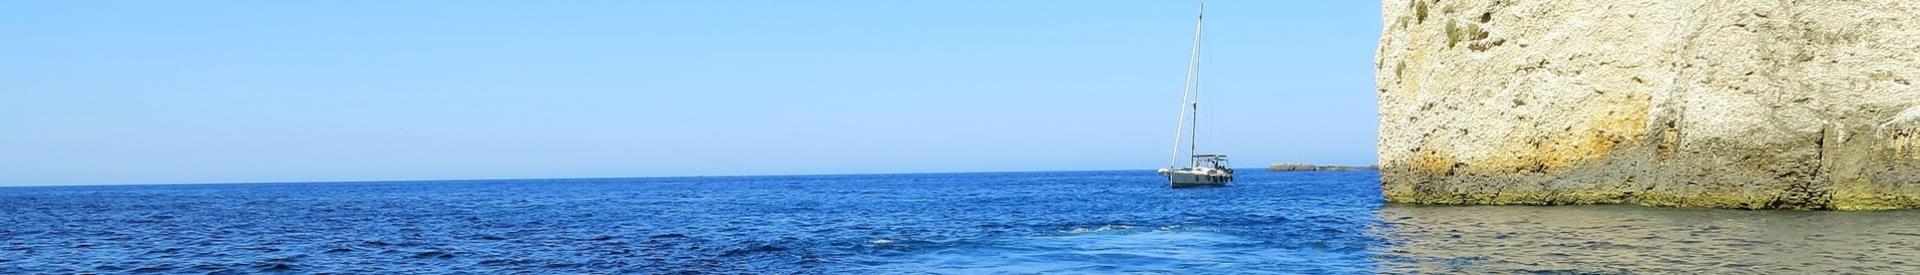 Spend a vacation and enjoy the sea in Catania at BW Hotel Mediterraneo